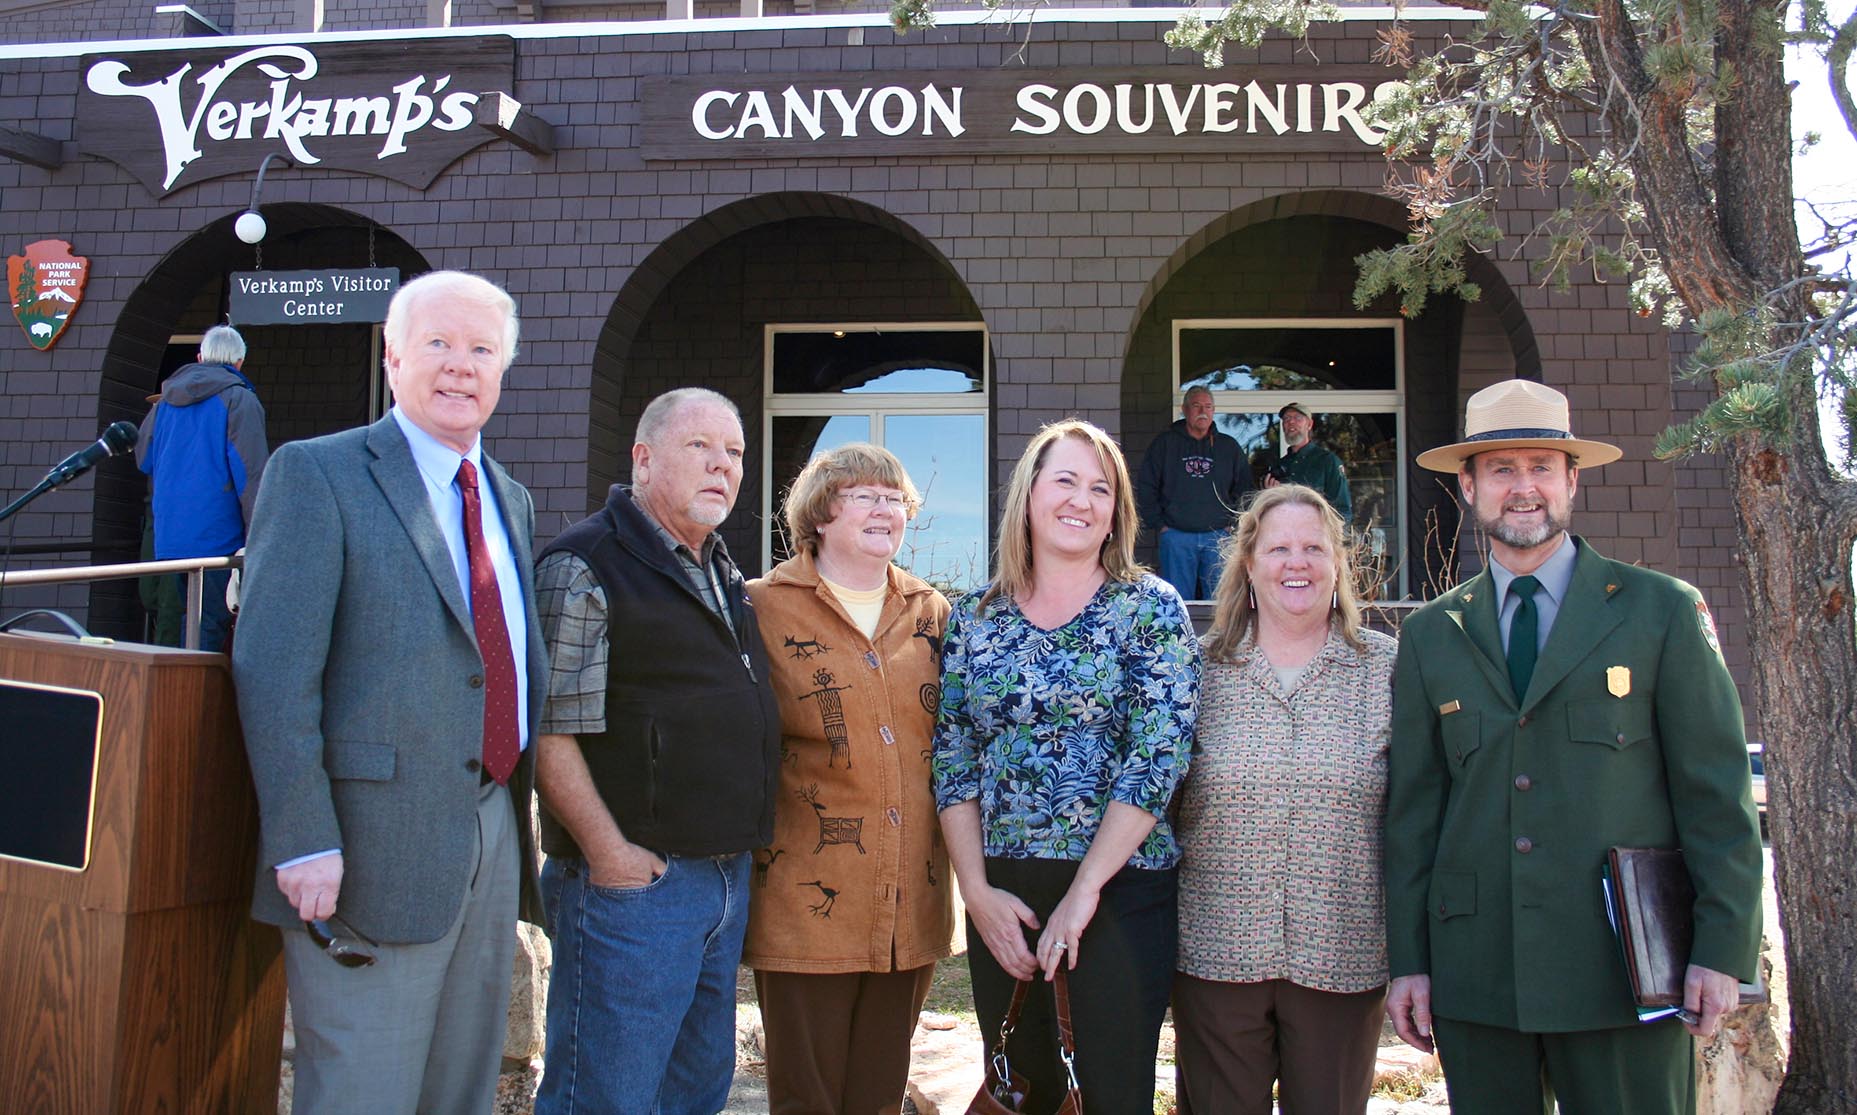 6 people posing for a group photo. 5 are members of the Verkamp family. On the far right is a man wearing a National Park Service uniform. The building in the background has signs that read, "Verkamp's", and "Canyon Souvenirs.